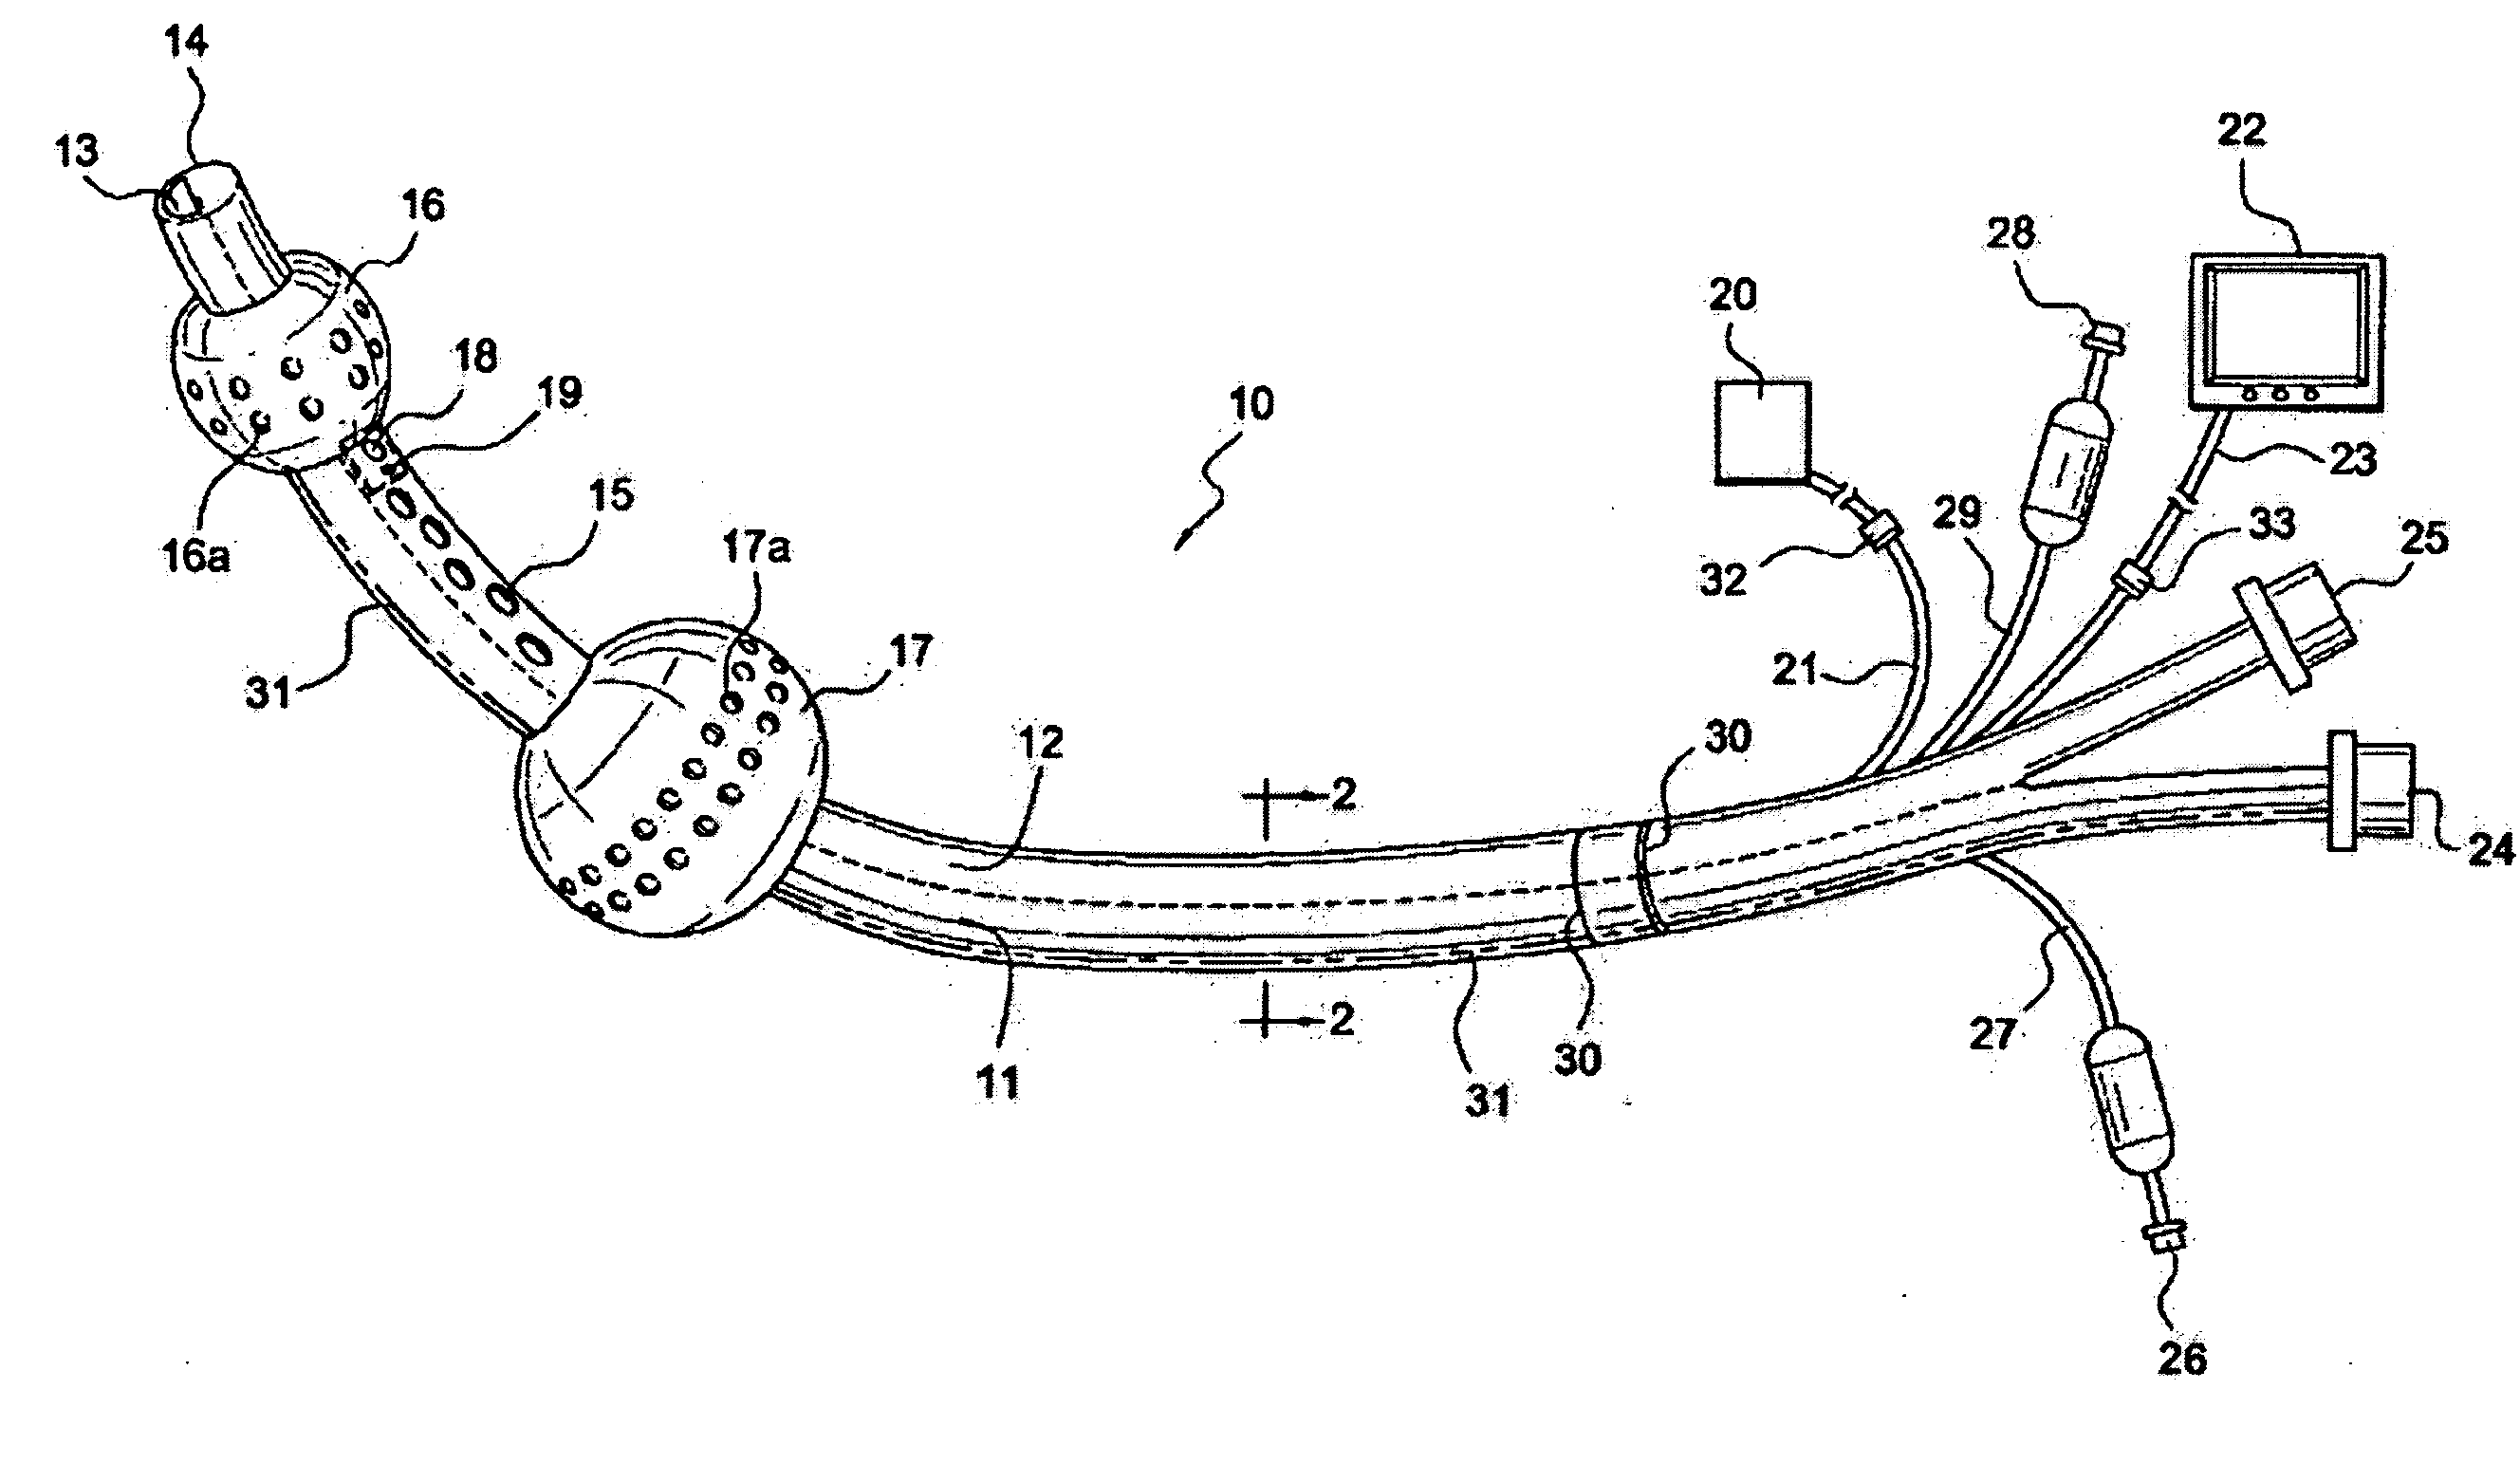 Visualization airway apparatus and methods for selective lung ventilation